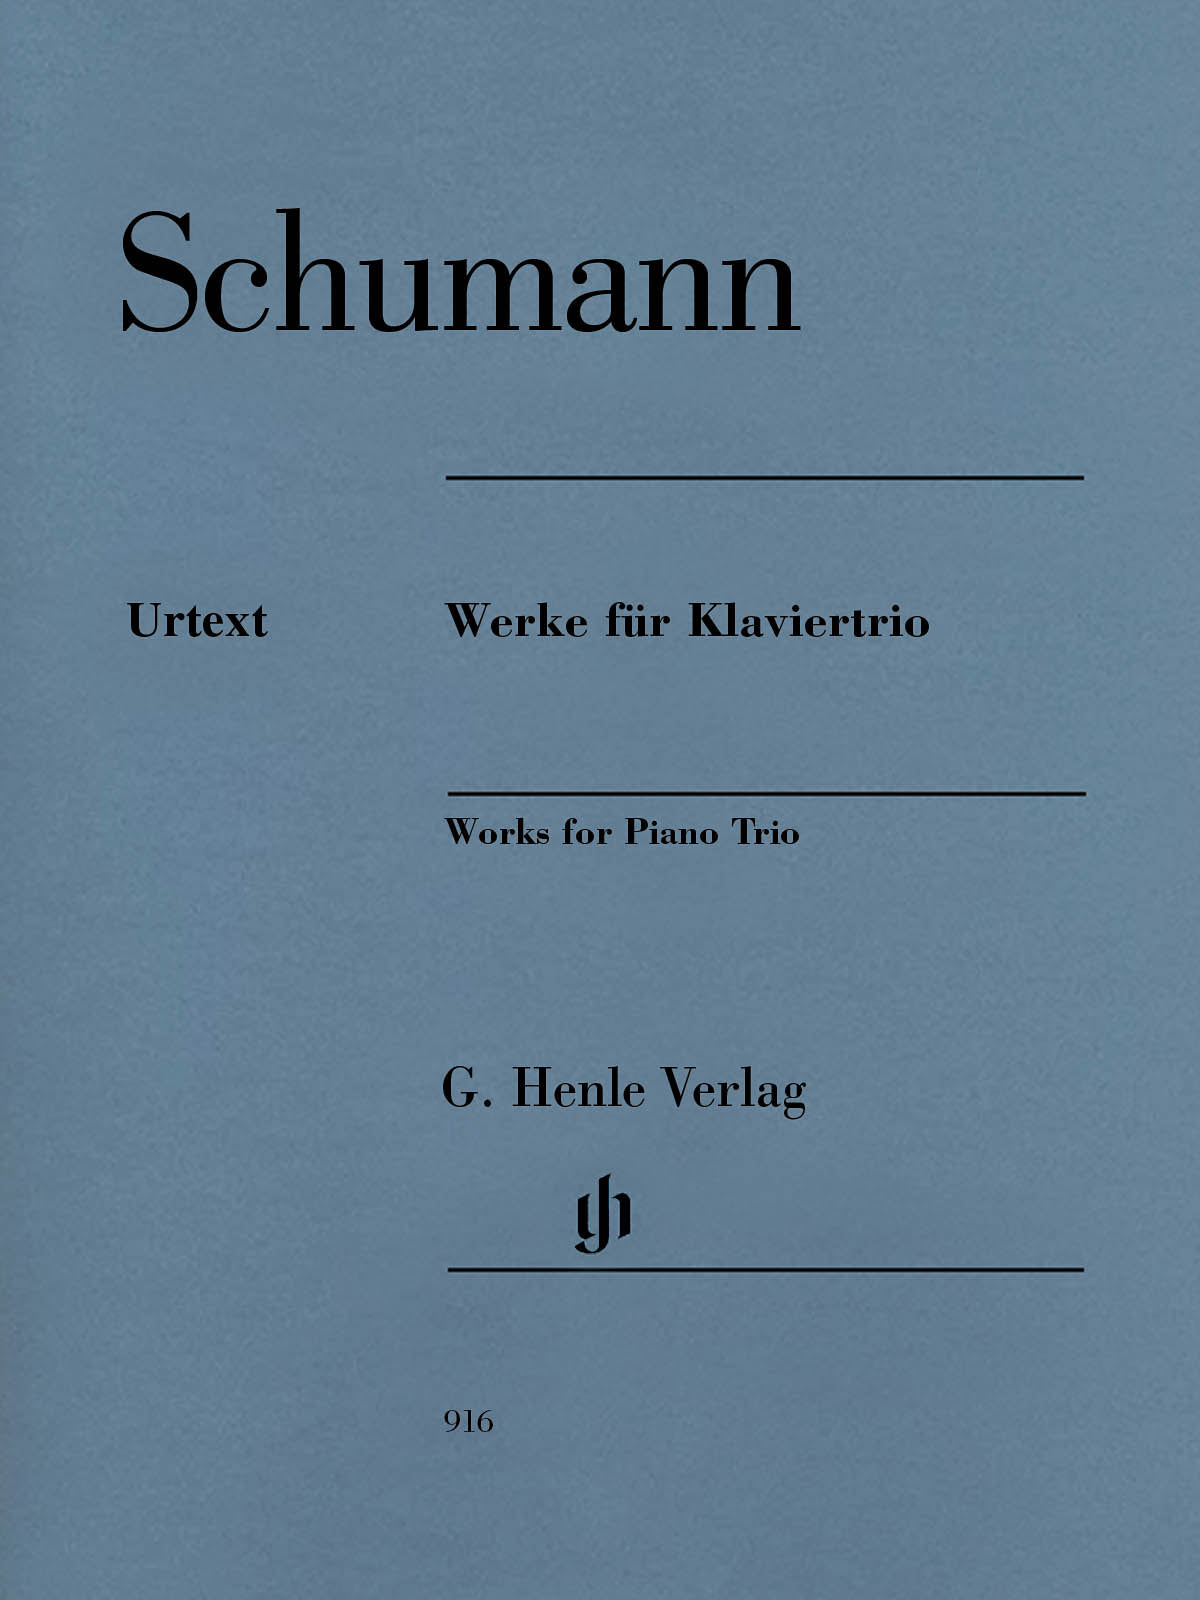 Schumann: Works for Piano Trio